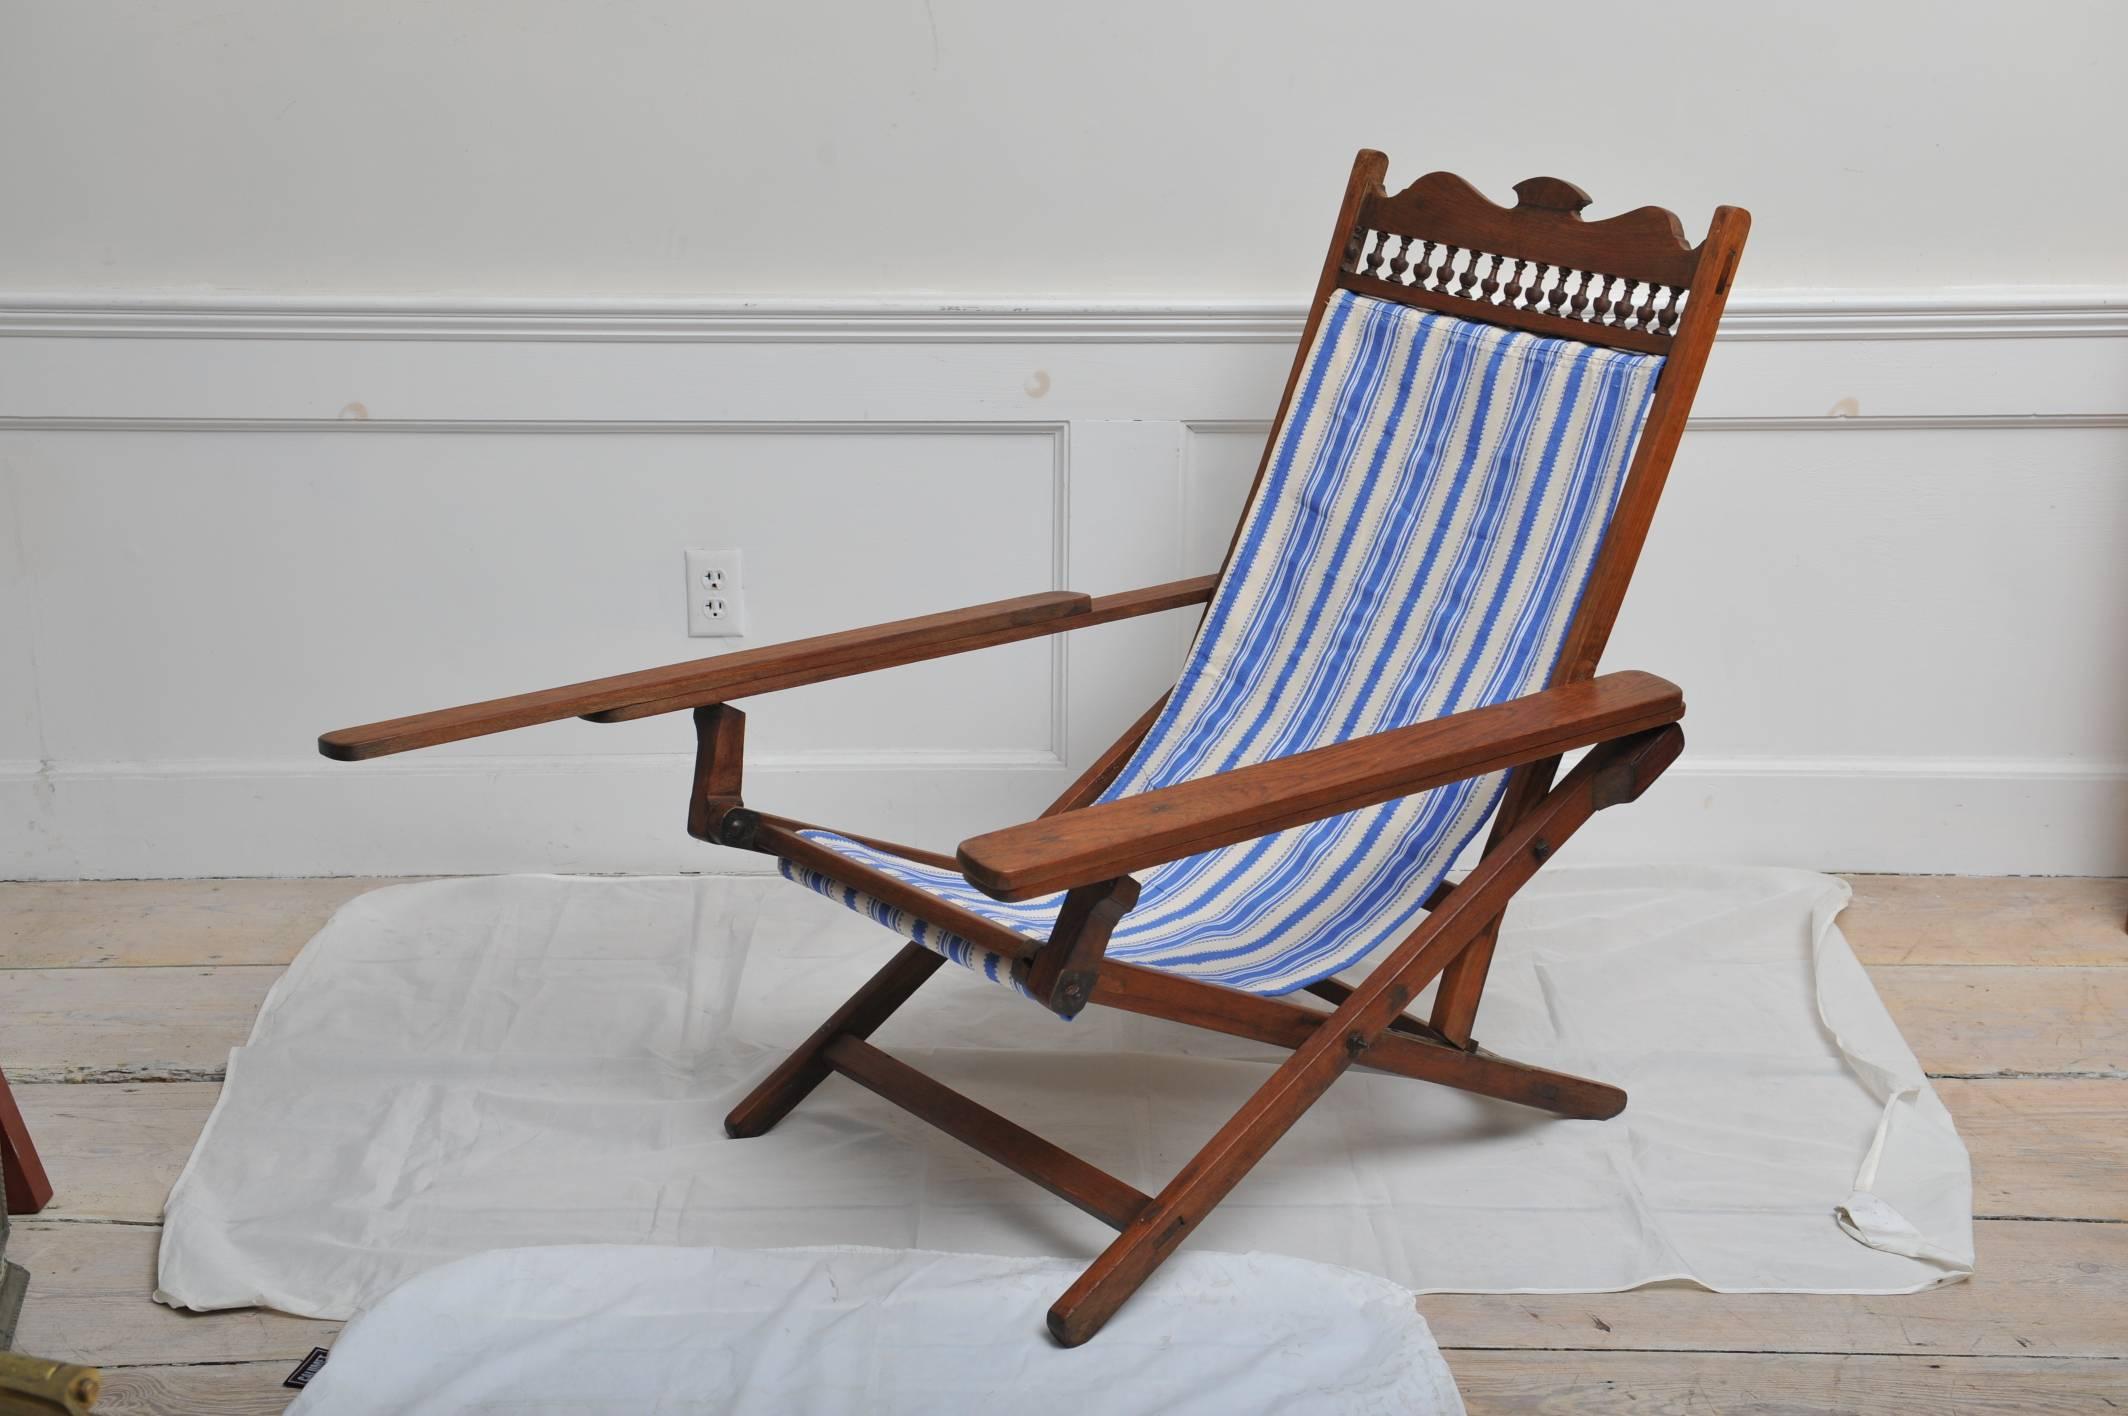 British Campaign sling-back teak plantation chair from the 1940s (fabric replaced). It folds, adjusts (4 settings) and the arm rests pull forward to create leg rests. Brass hardware and turned dowel back and detachable pillow. Fabric width is 19